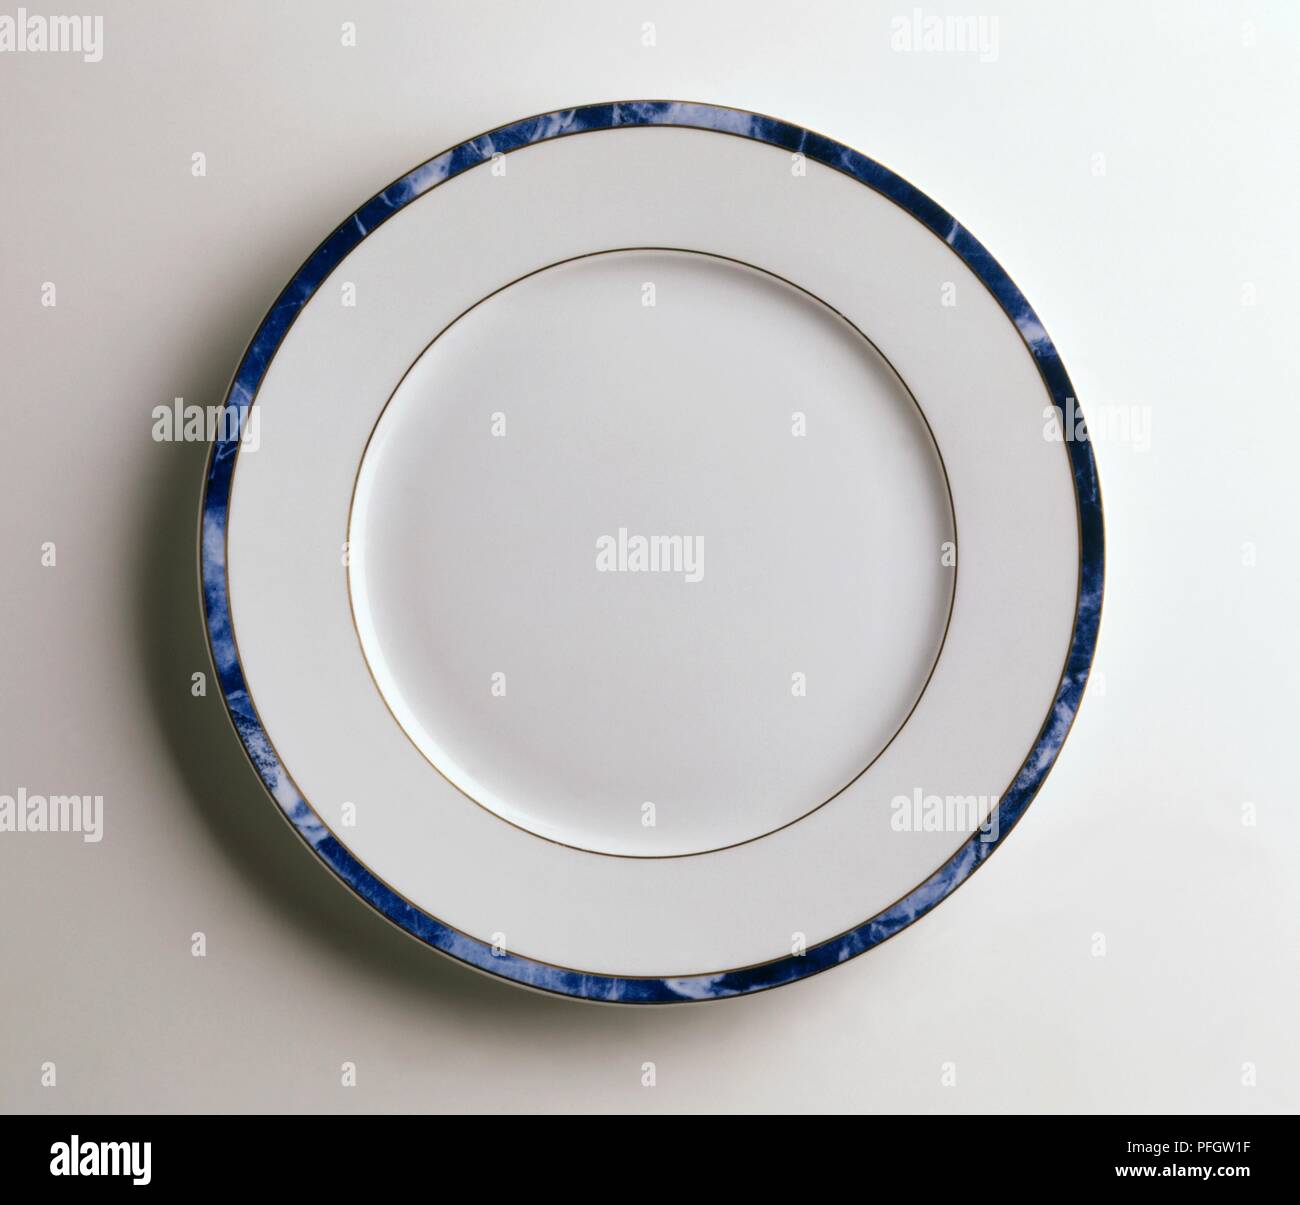 A white plate with blue rim Stock Photo